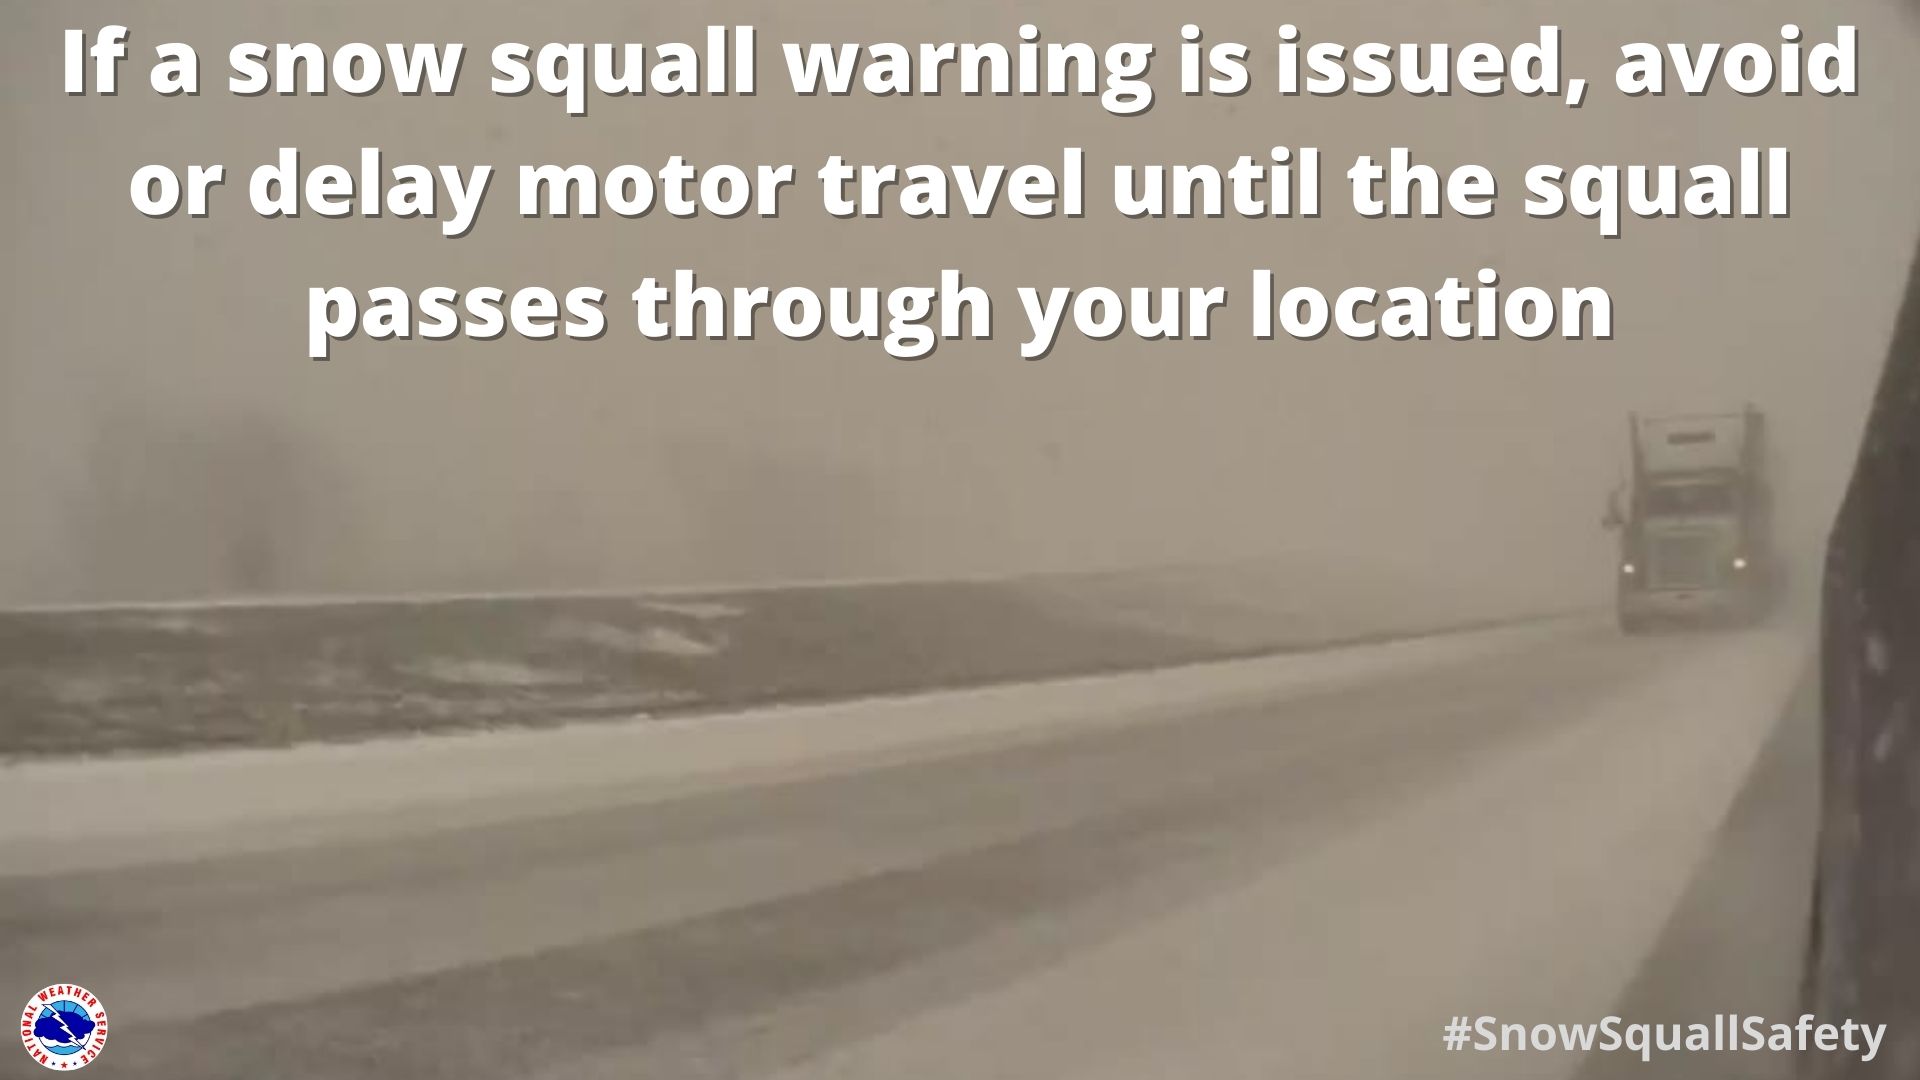 If a snow squall warning is issued, avoid or delay motor travel until the squall passes through your location. Footage from a car in the middle of a snow squall shows very low visibility with heavier snow falling and laying on the road.